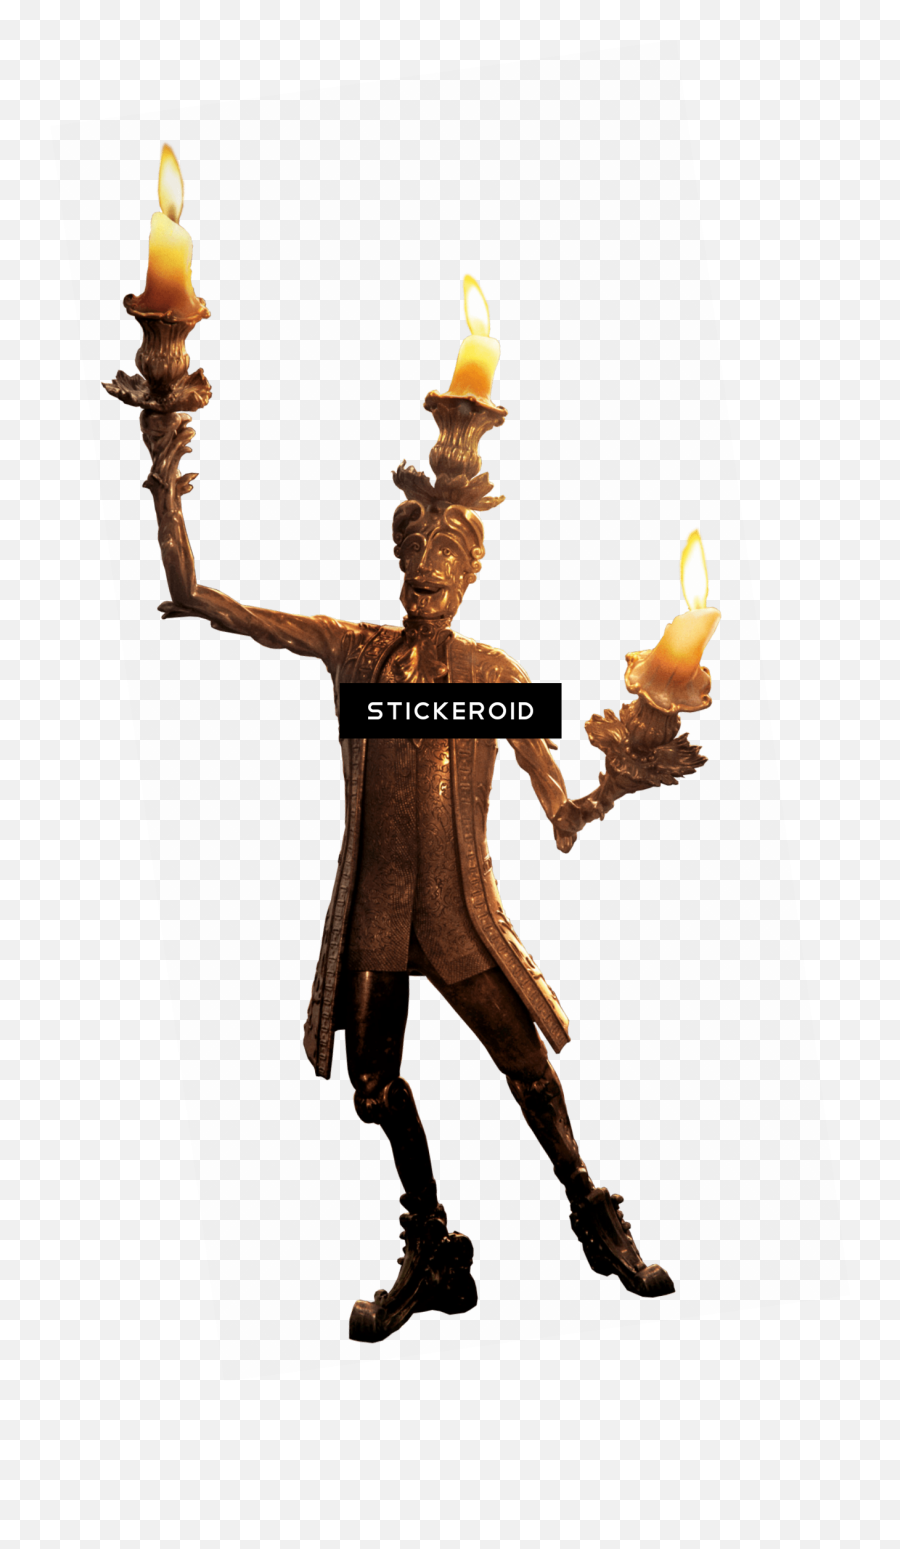 Limited Edition Lumiere Candlestick - Live Action Lumiere Beauty And The Beast Emoji,Free Download Emoji Movie 2017